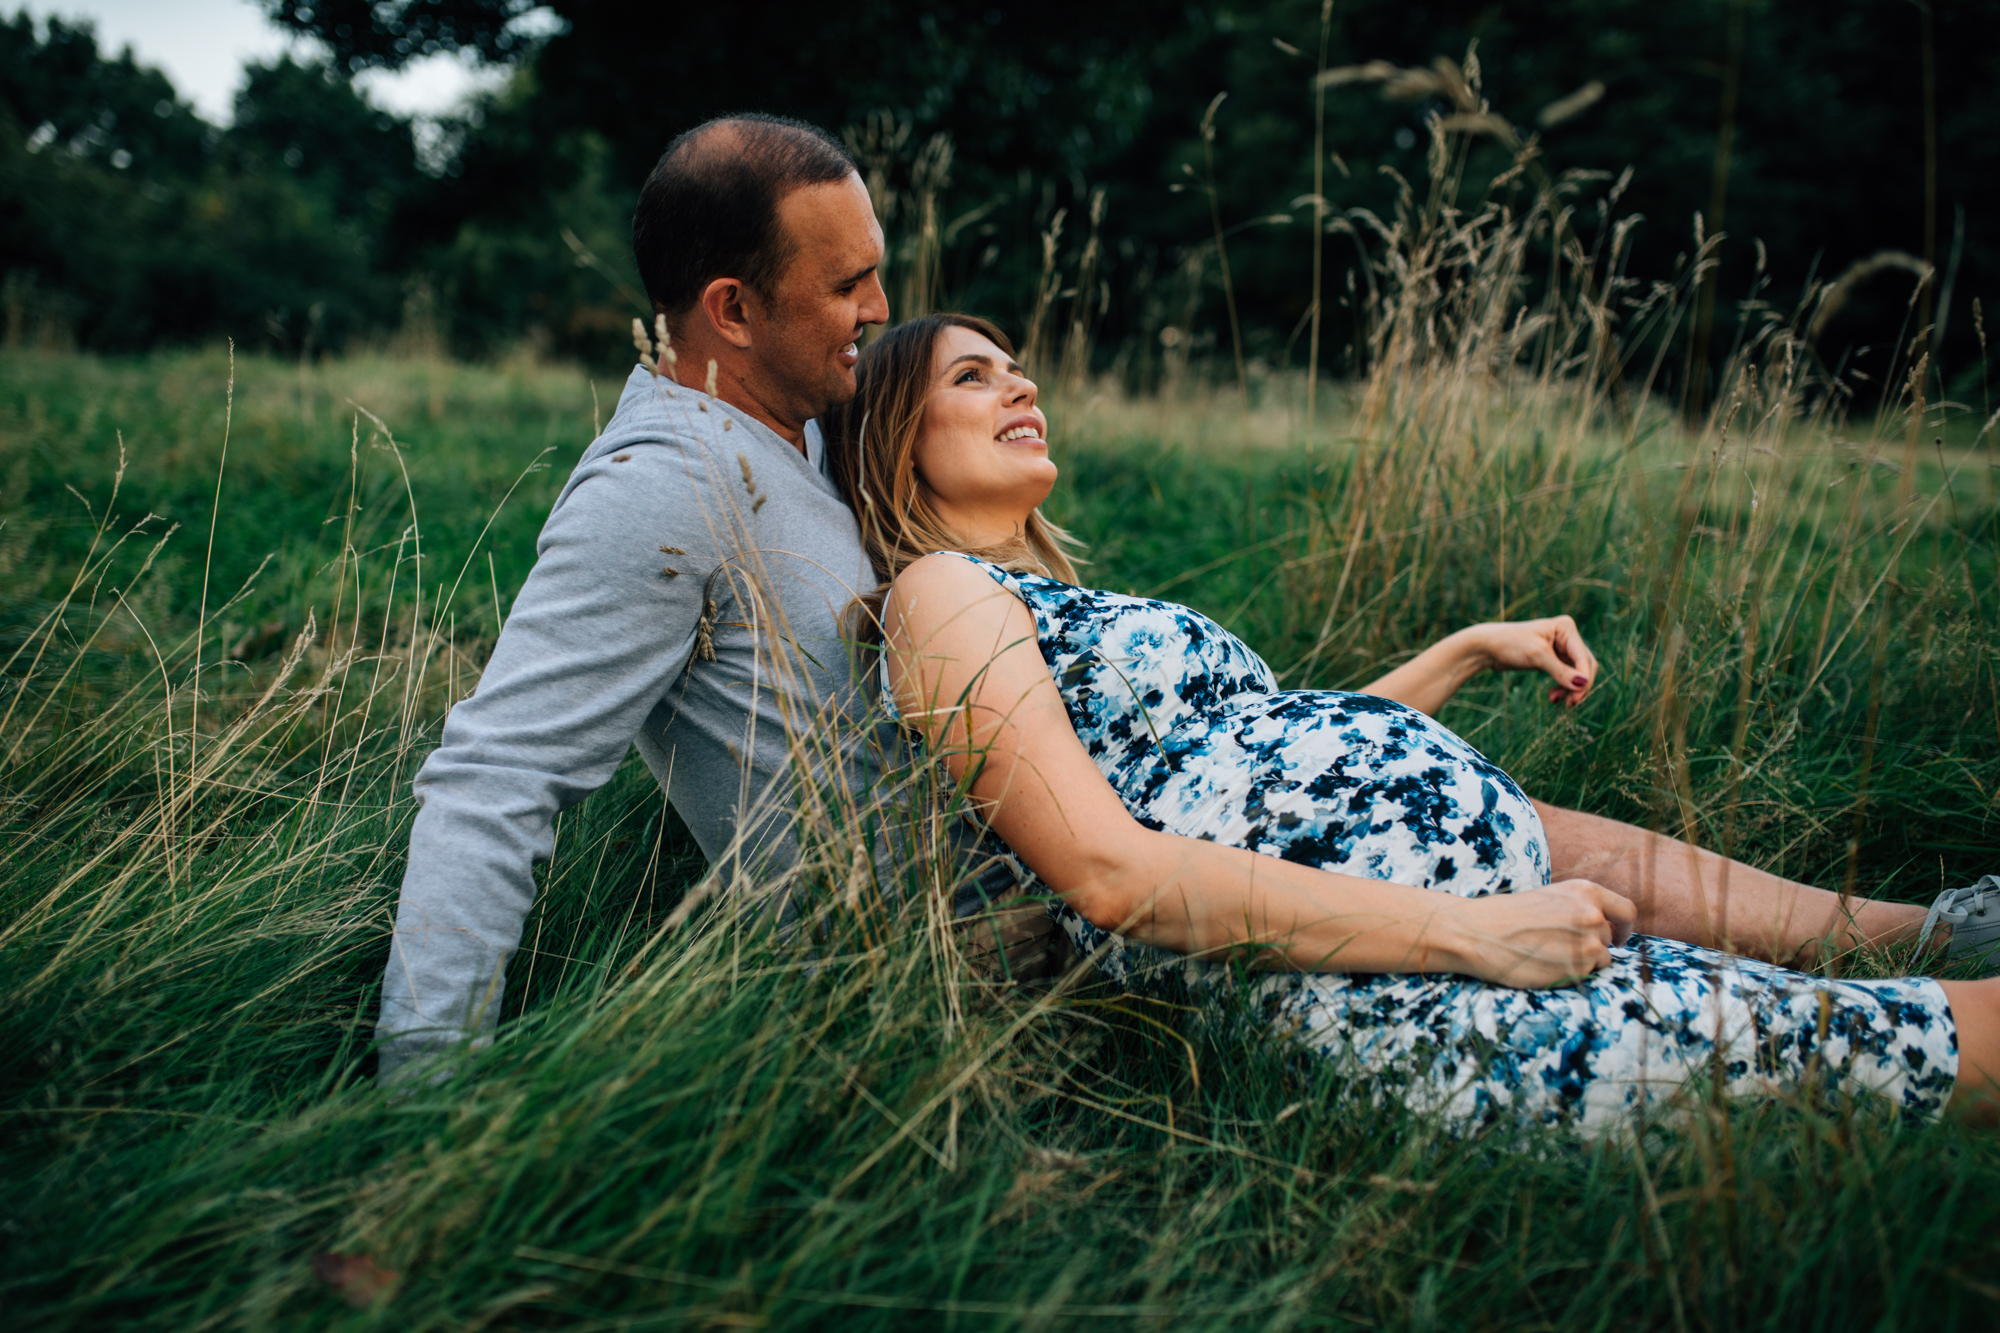 Maternity photography in Primrose Hill, London